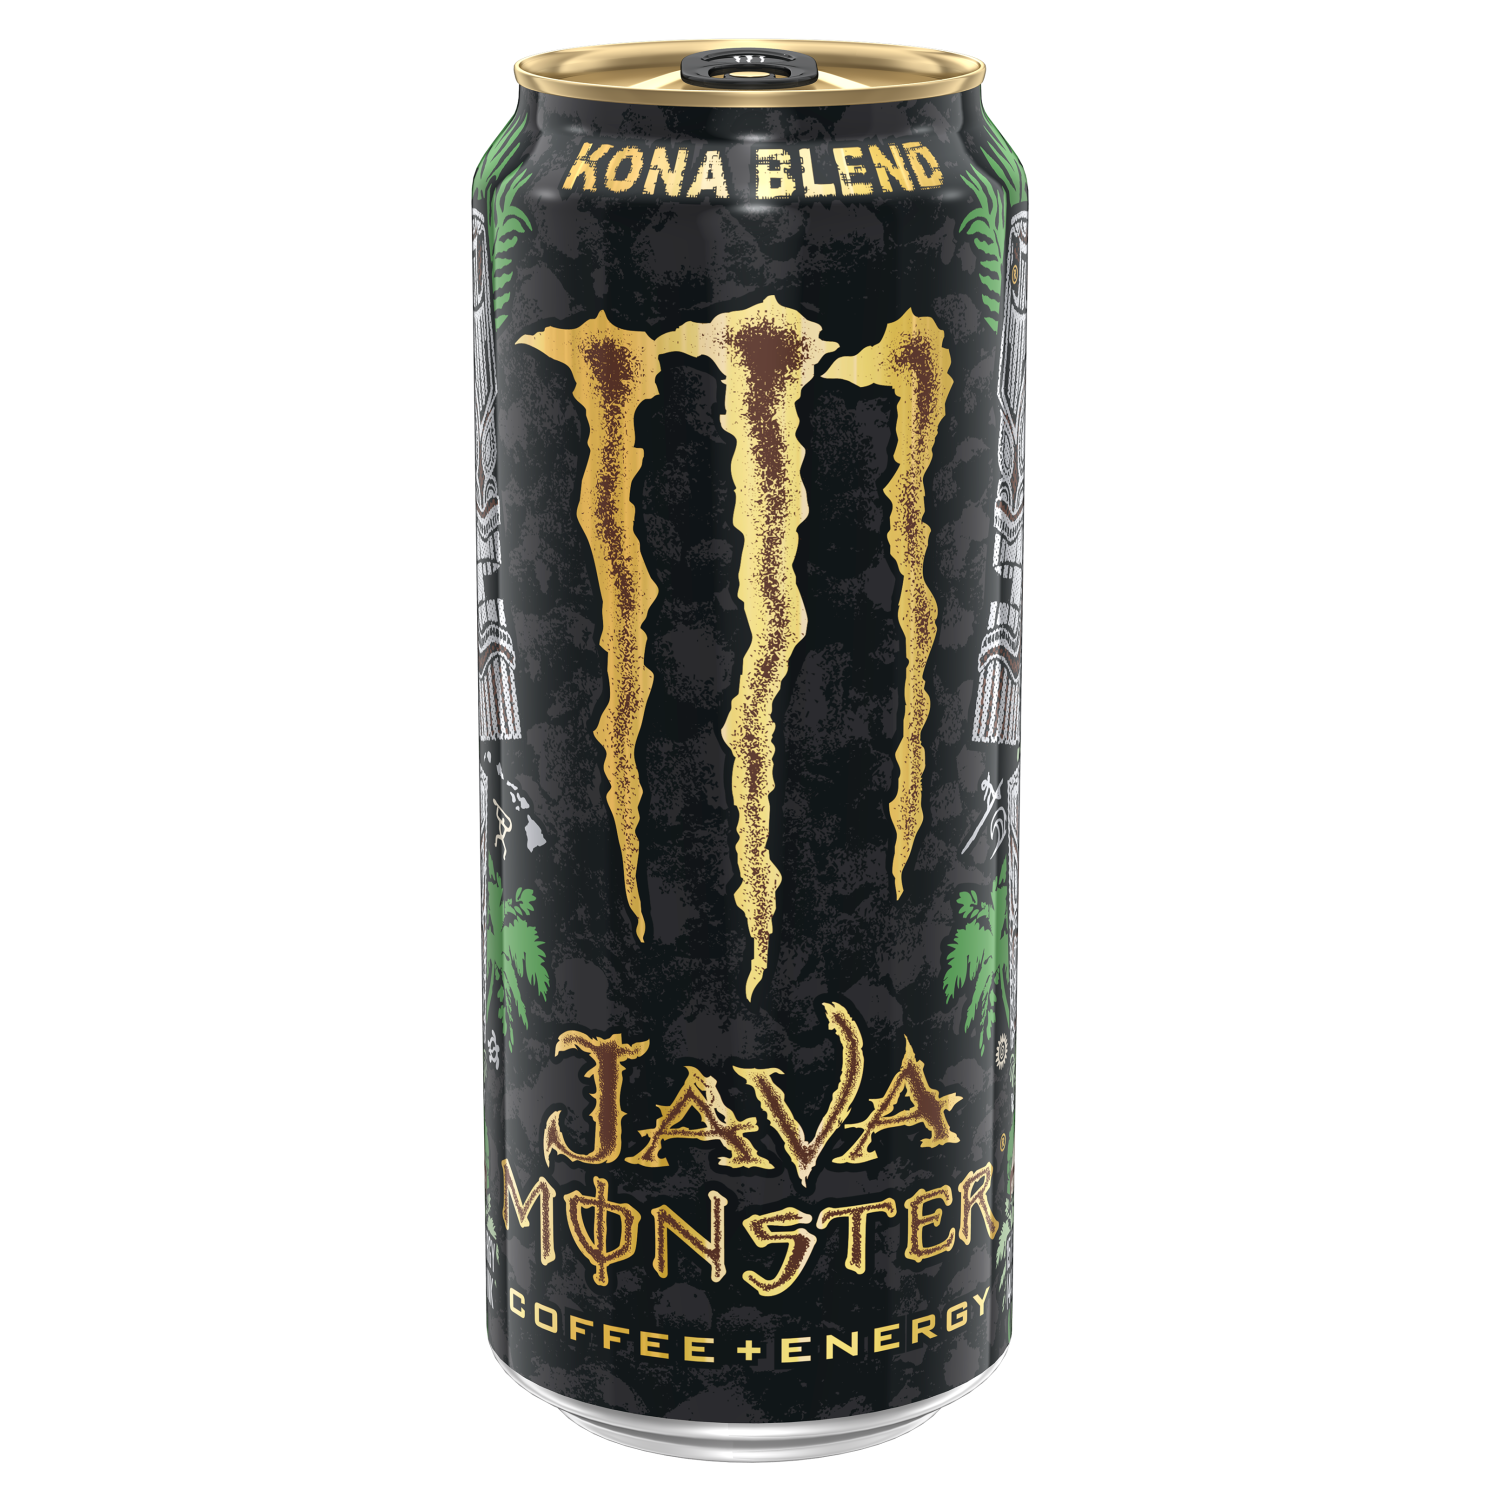 slide 5 of 5, Monster Energy Everyone knows some of the best coffee on the planet comes from the Kona side of the Big Island of Hawaii. No need to trek the slopes of Mauna Loa braddah since we already got some of Pele's thunder and put it in a can. Select Kona beans combined with premium imported coffee, supercharged with our energy blend makes for an unbeatable combination. Try Monster's new Big Island brew it's just too good to be true. Java Monster... premium coffee and cream brewed up with killer flavor, supercharged with Monster energy blend., 15 oz